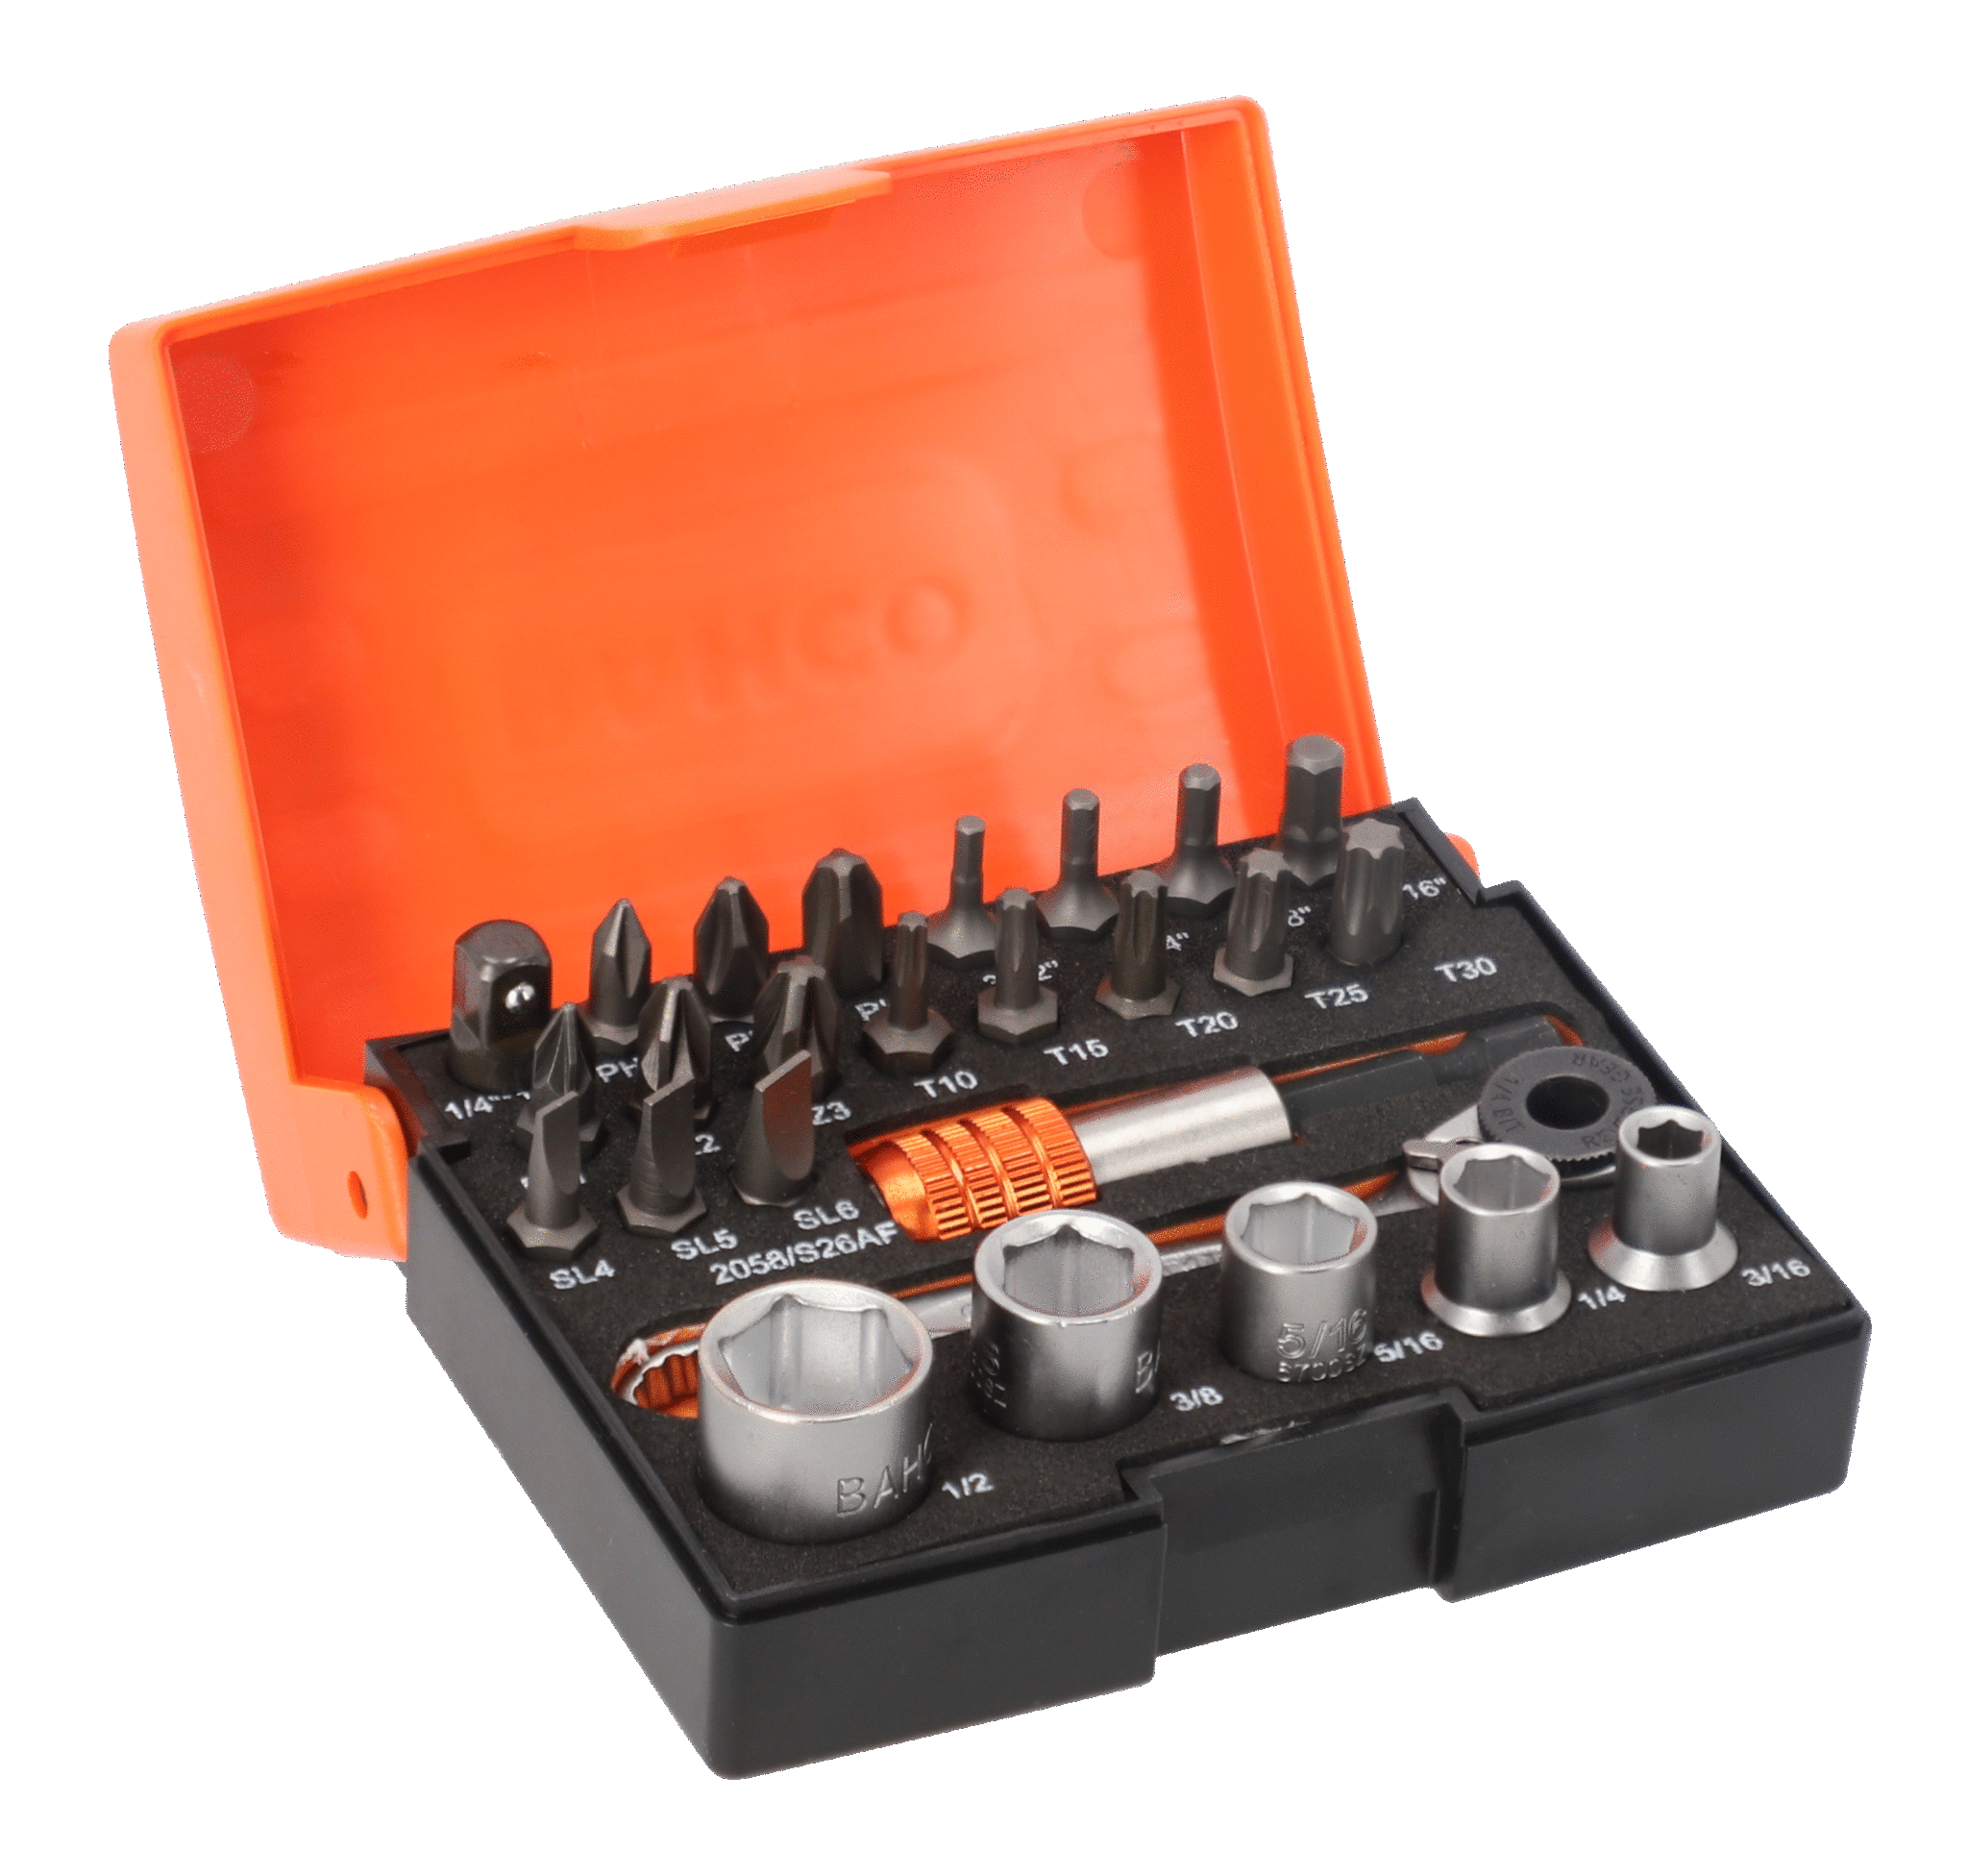 1/4" Standard Bit and Socket Set for Slotted/Phillips/Pozidriv/TORX®/Hex Head Screw 26 Pcs - 2058/S26 by Bahco